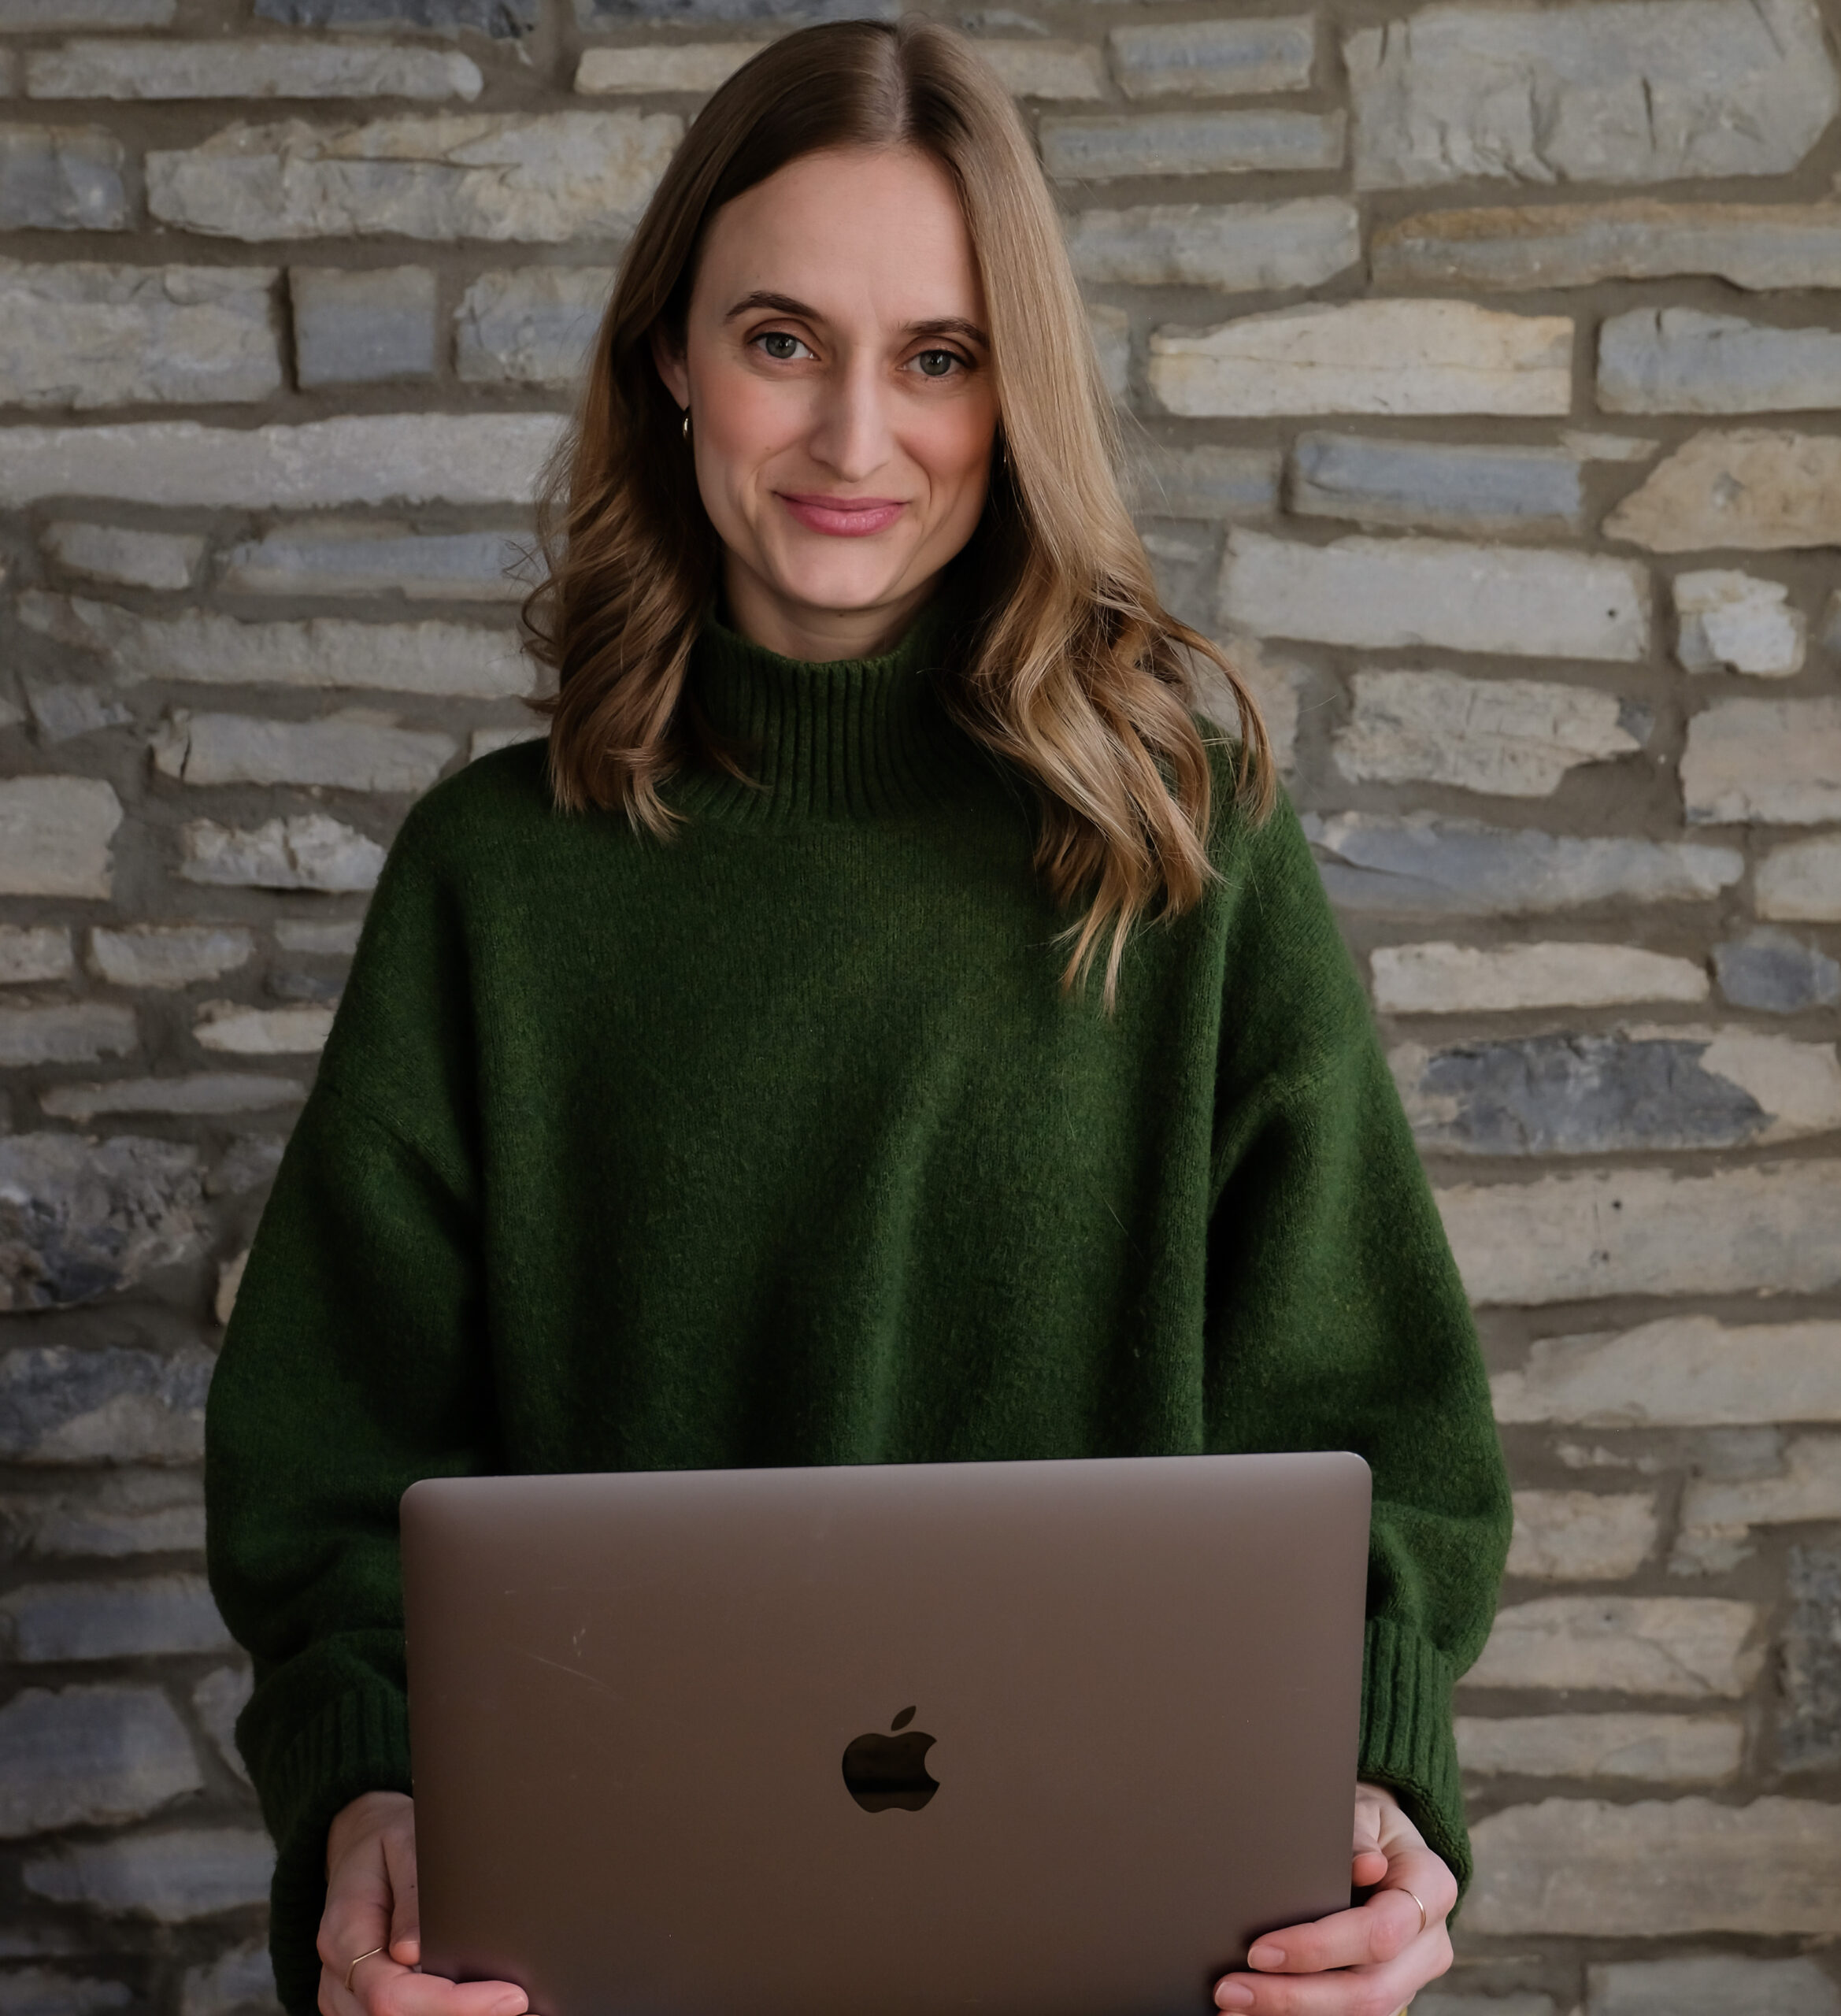 Image of Sophia Fabiilli sitting against a rock wall holding a laptop.